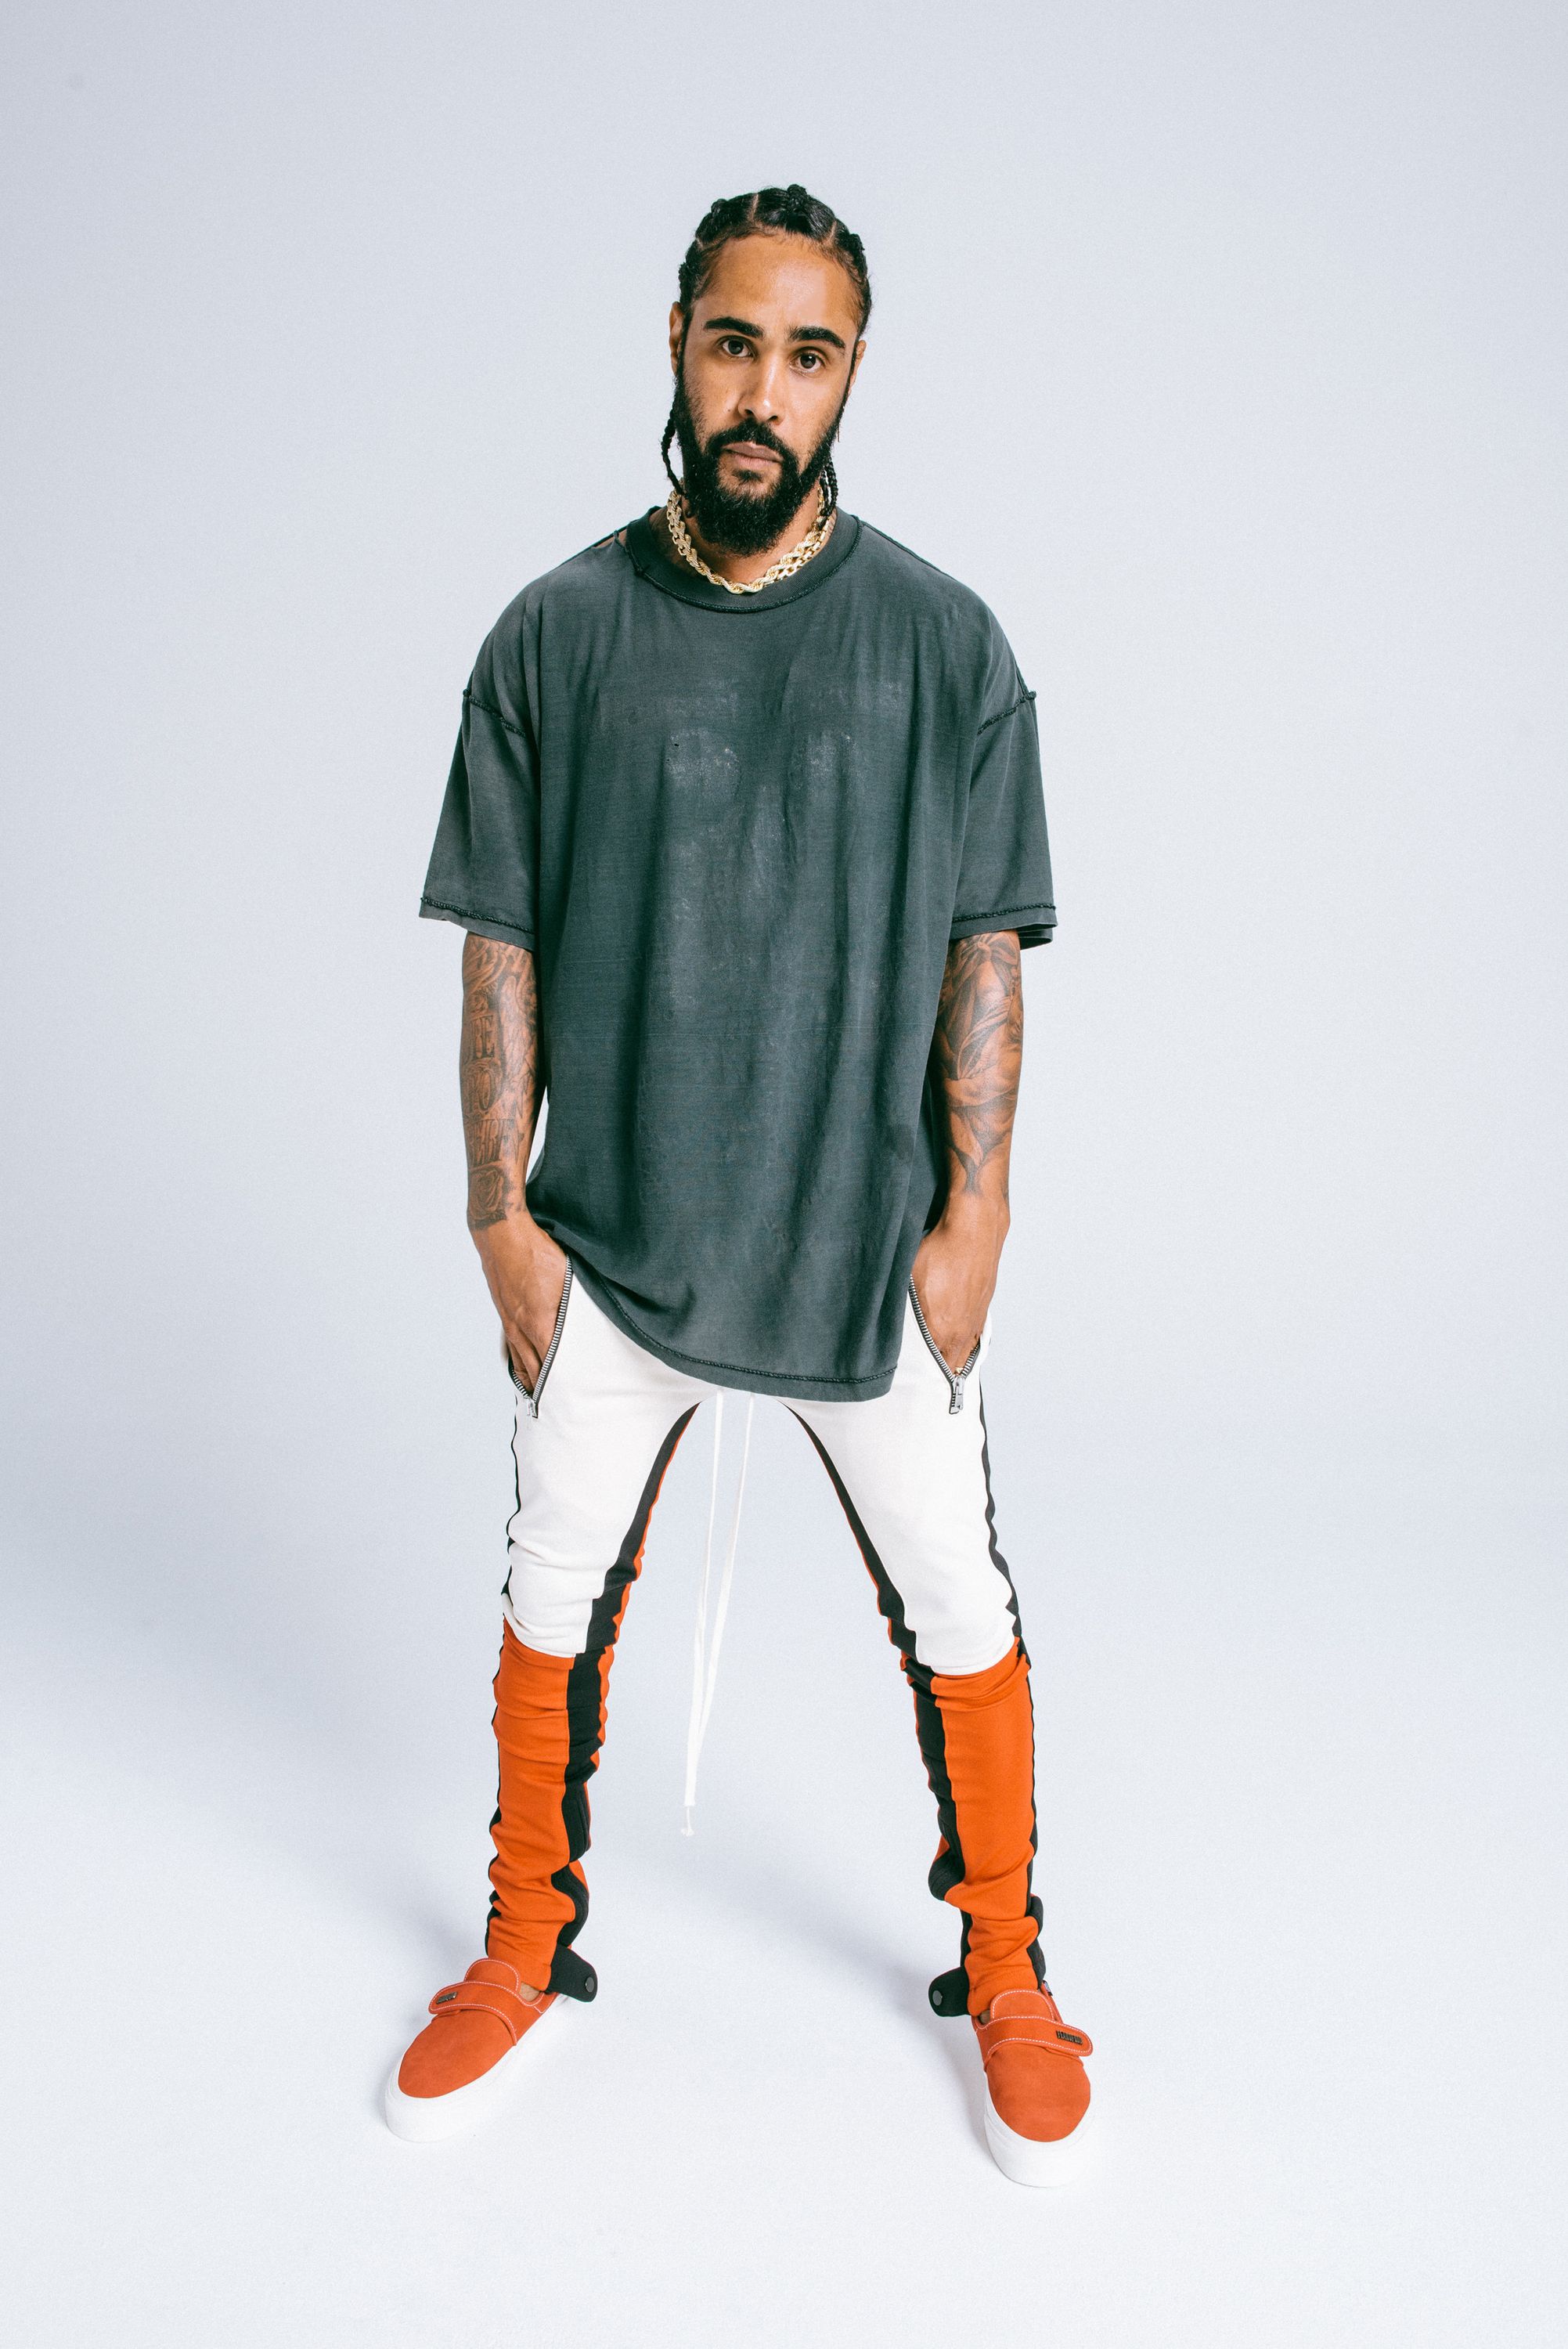 The Reason You Hate Jerry Lorenzo & Fear of God